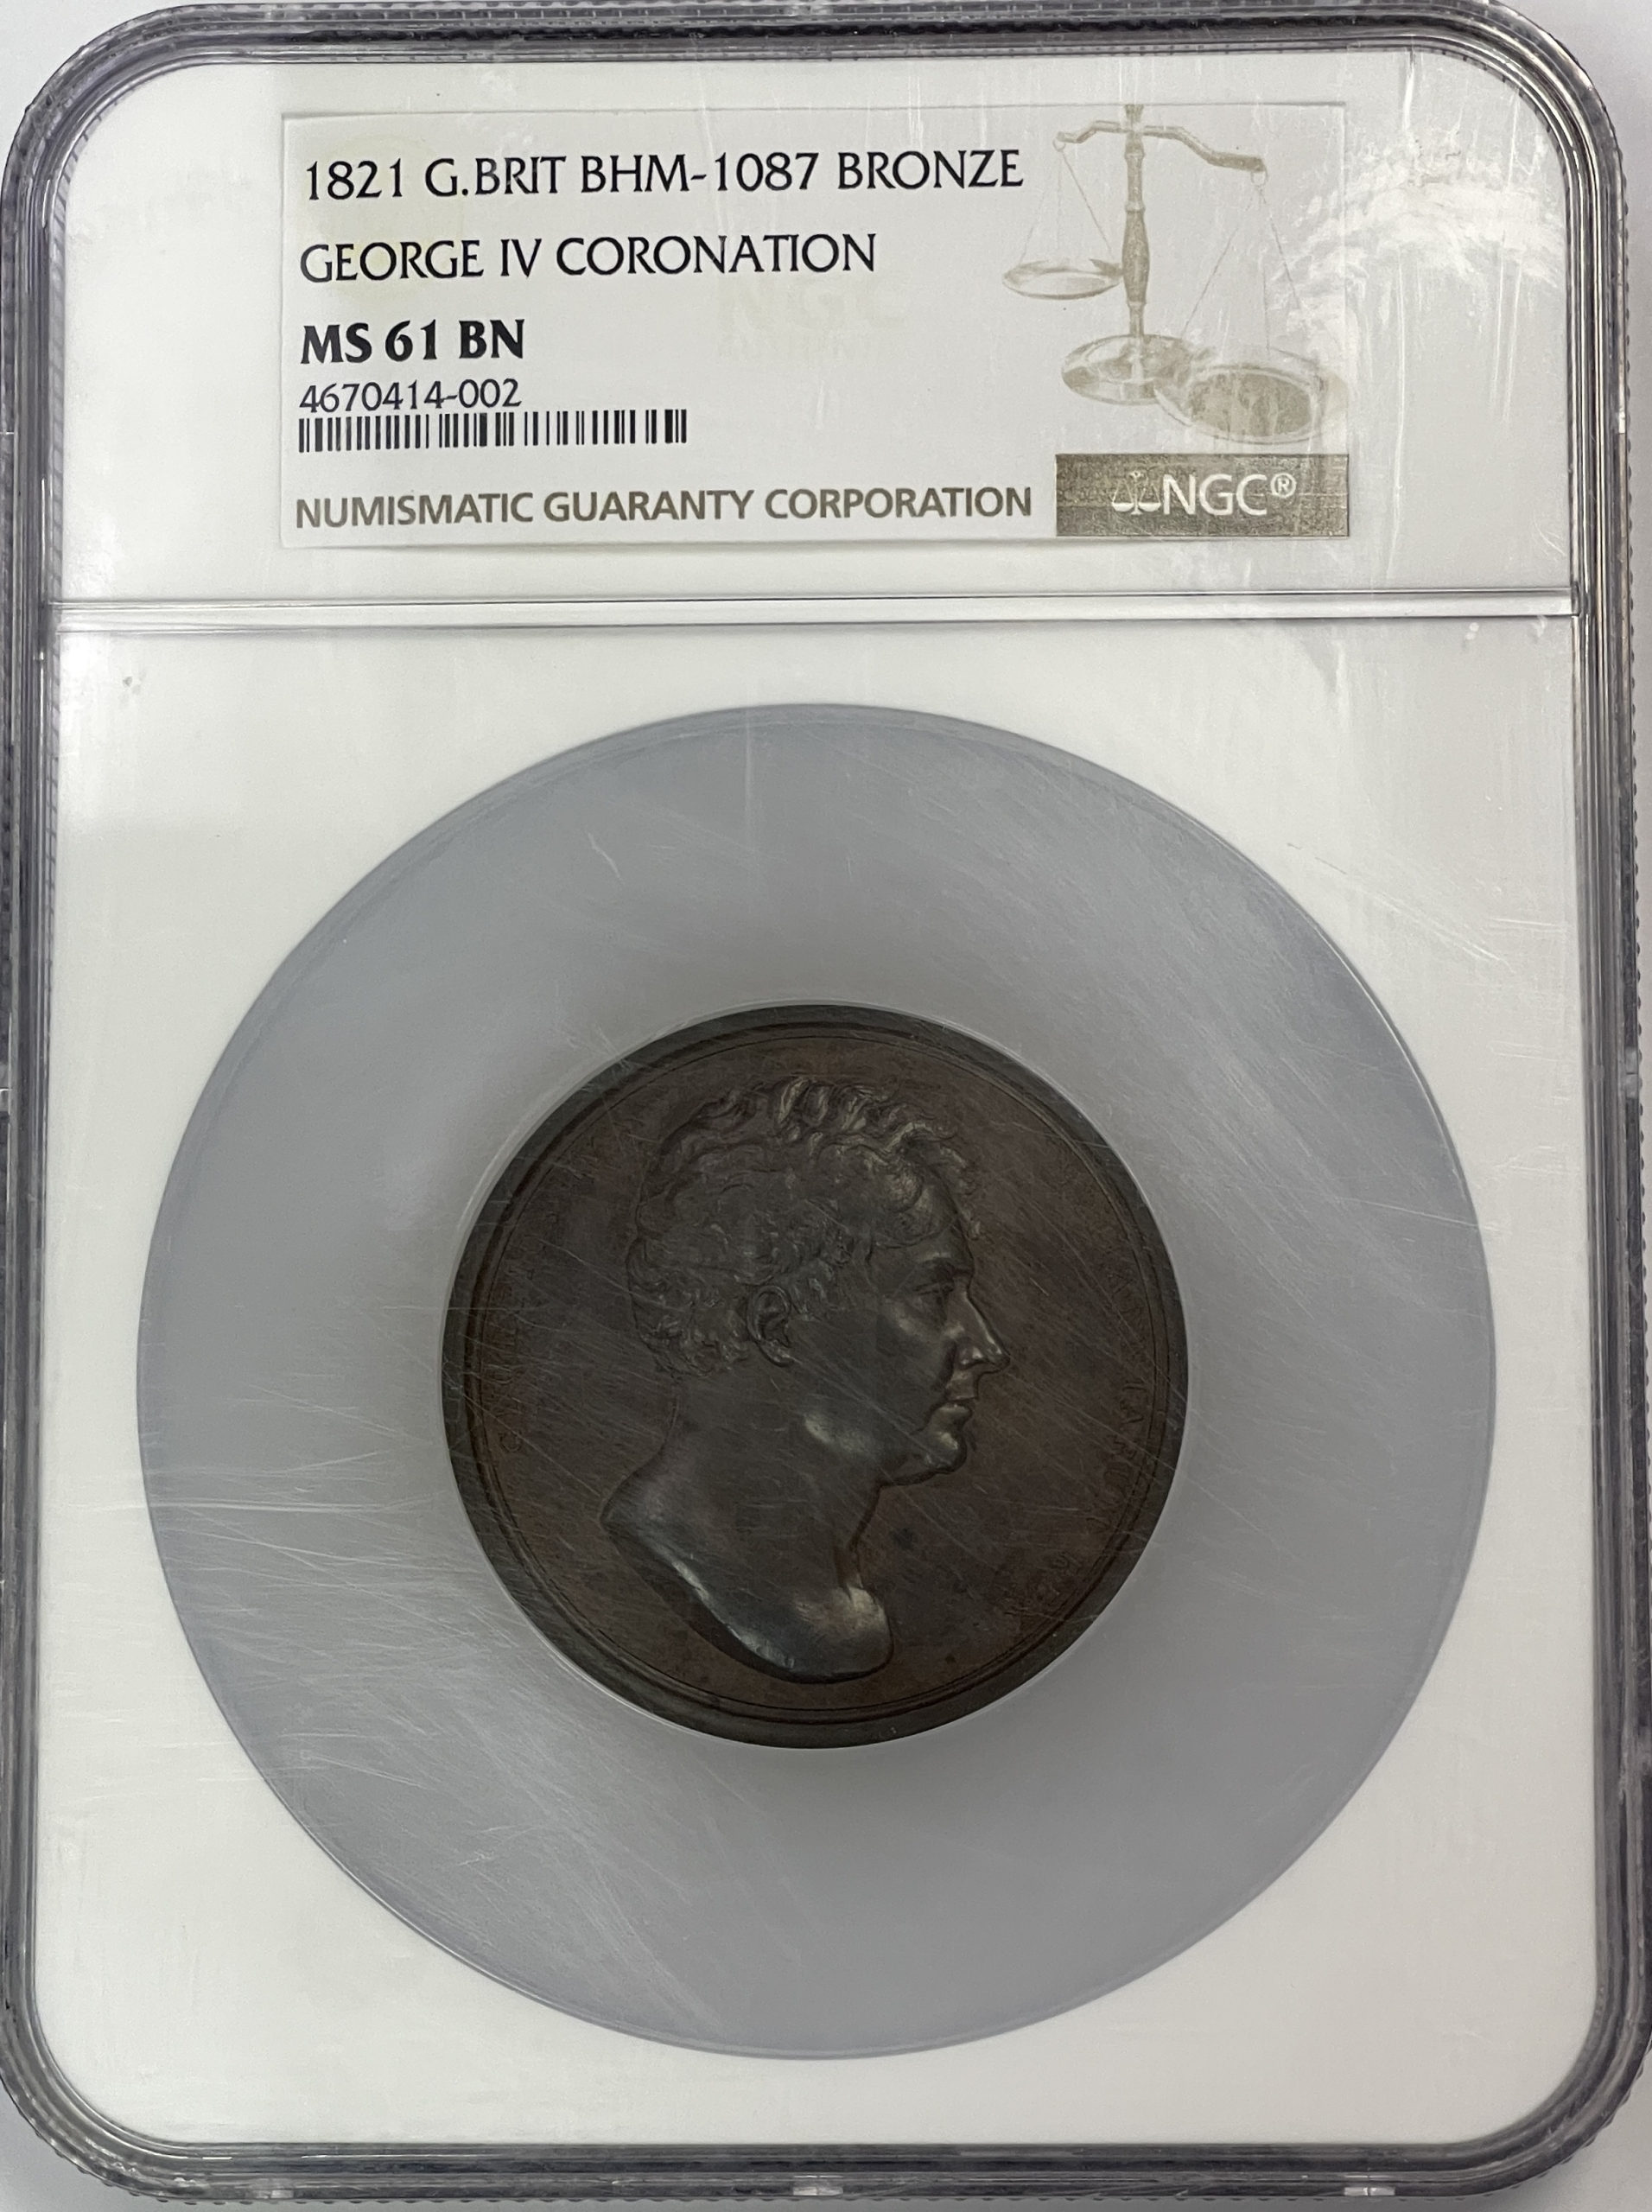 1821 GREAT BRITAIN GEORGE IV BRONZE CORONATION MEDAL 55MM BHM-1087, NGC MS-61 BN